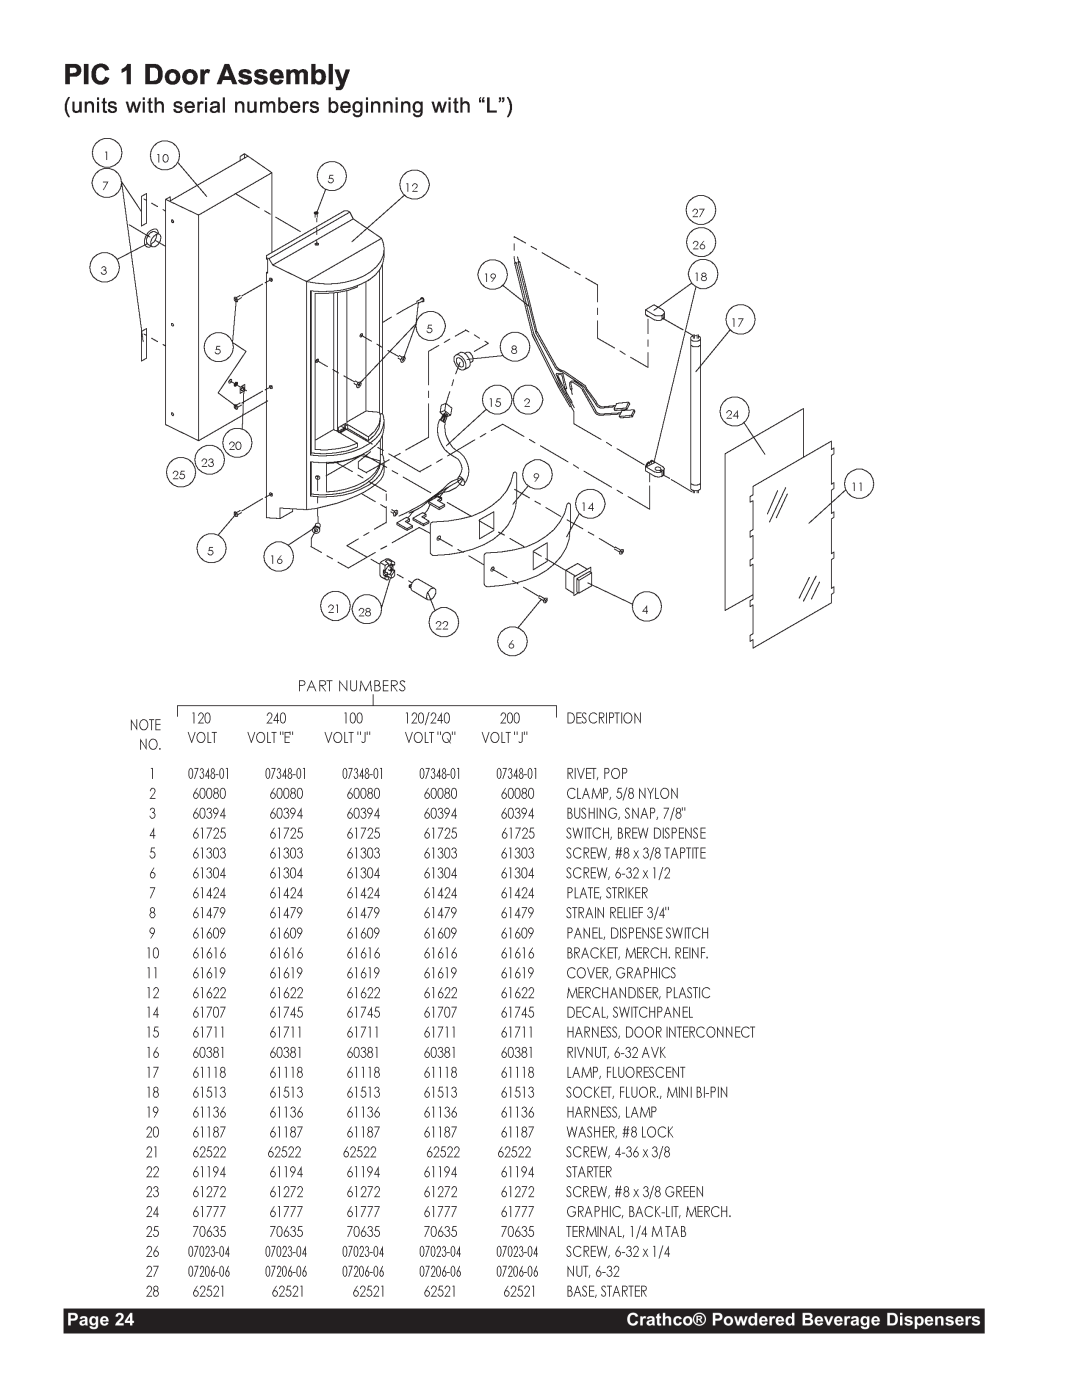 Grindmaster CC-302-20 service manual PIC 1 Door Assembly, units with serial numbers beginning with “L”, Page 